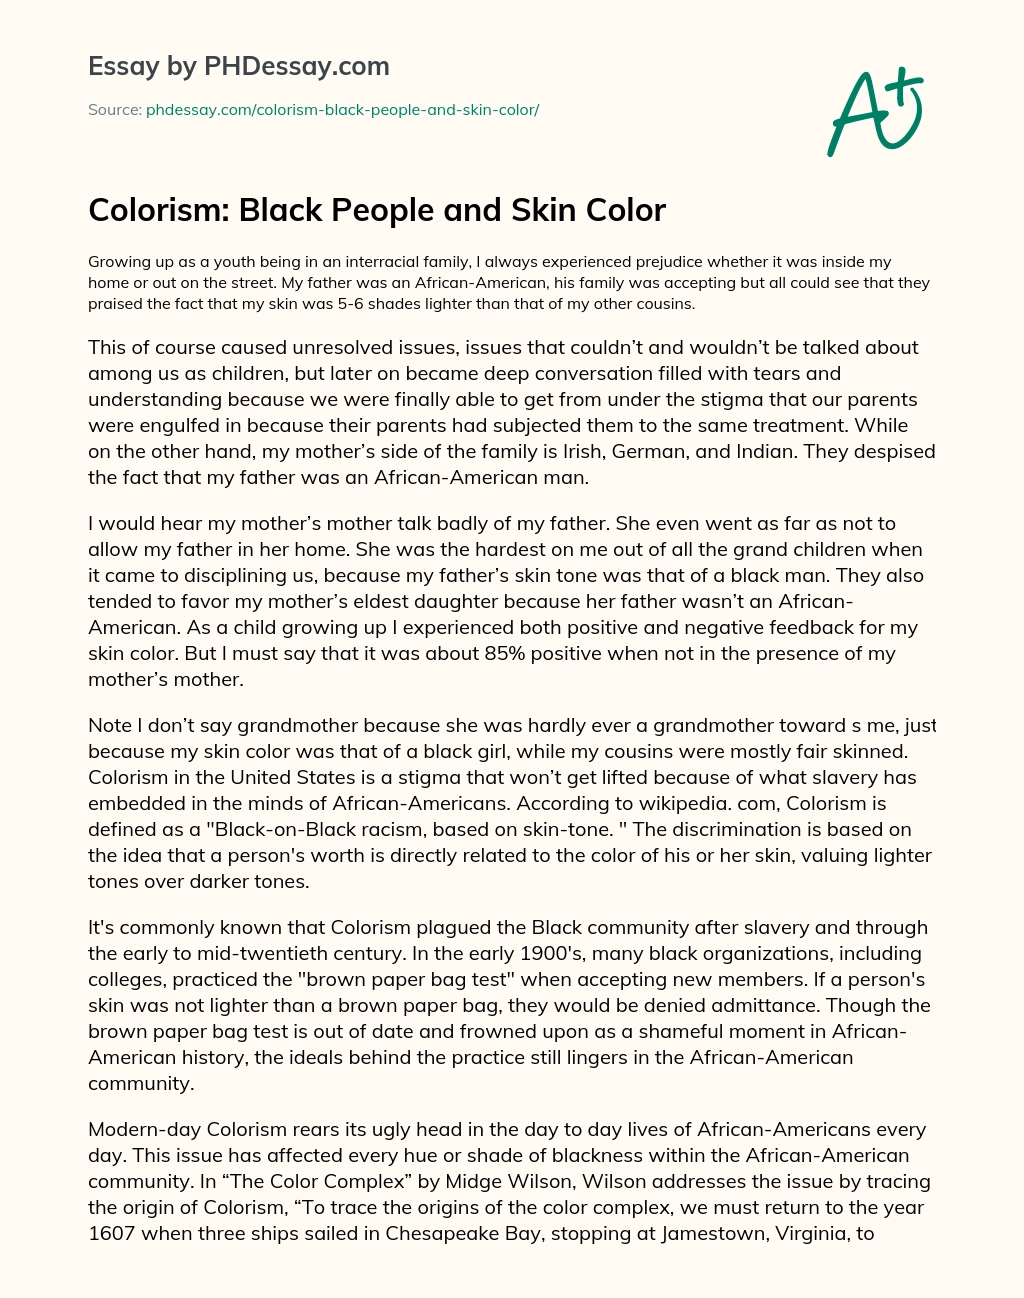 Colorism: Black People and Skin Color essay